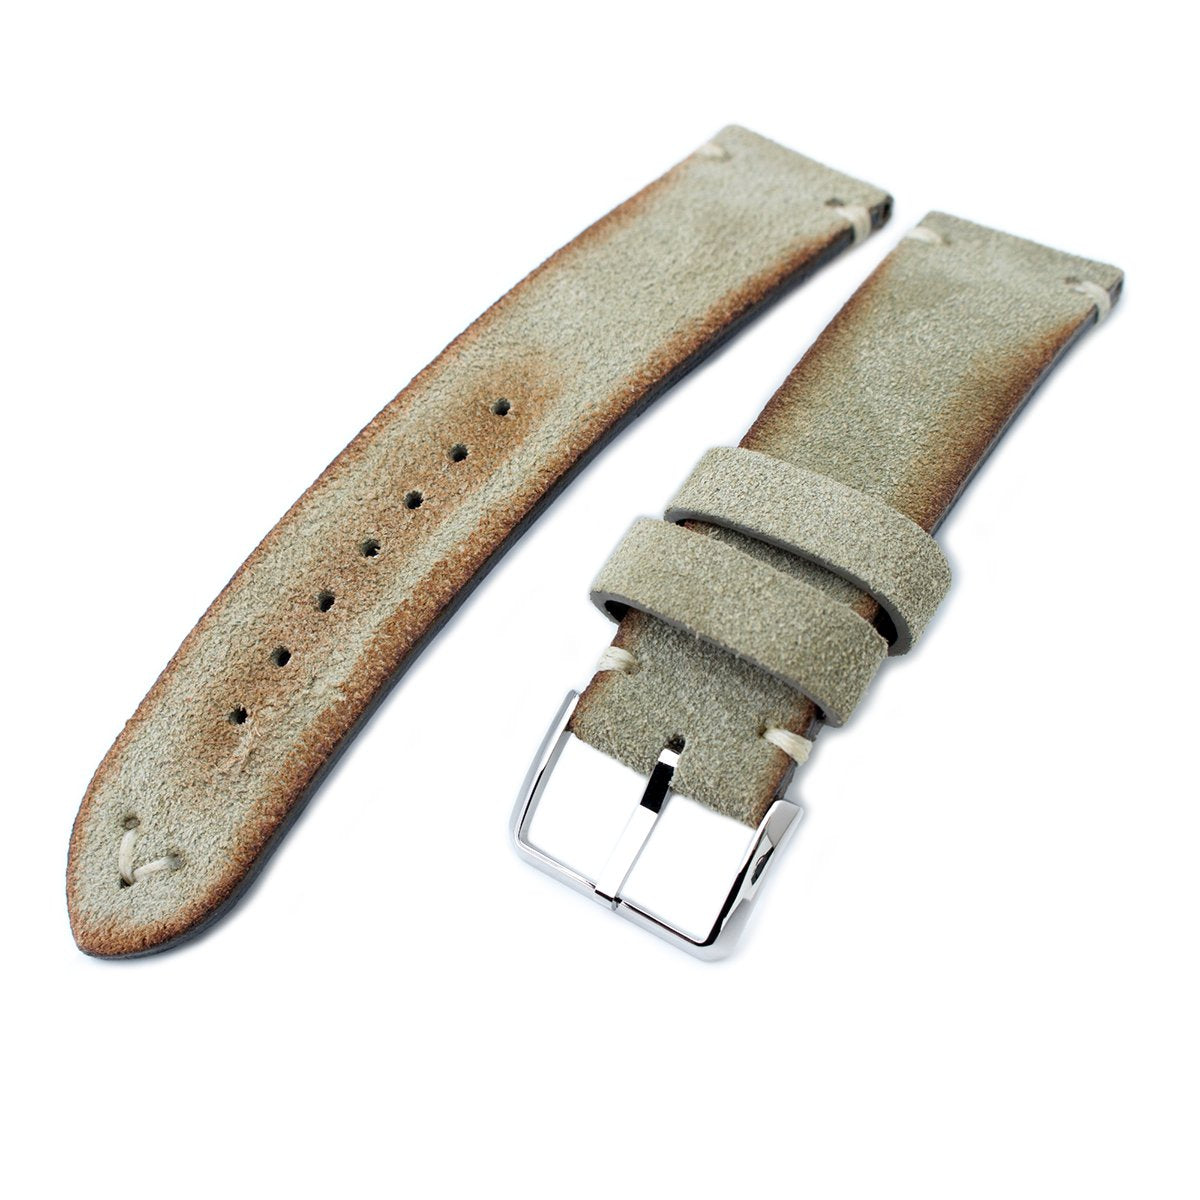 20mm 21mm 22mm MiLTAT Grey Green Genuine Nubuck Leather Watch Strap Beige Stitching Polished Buckle Strapcode Watch Bands